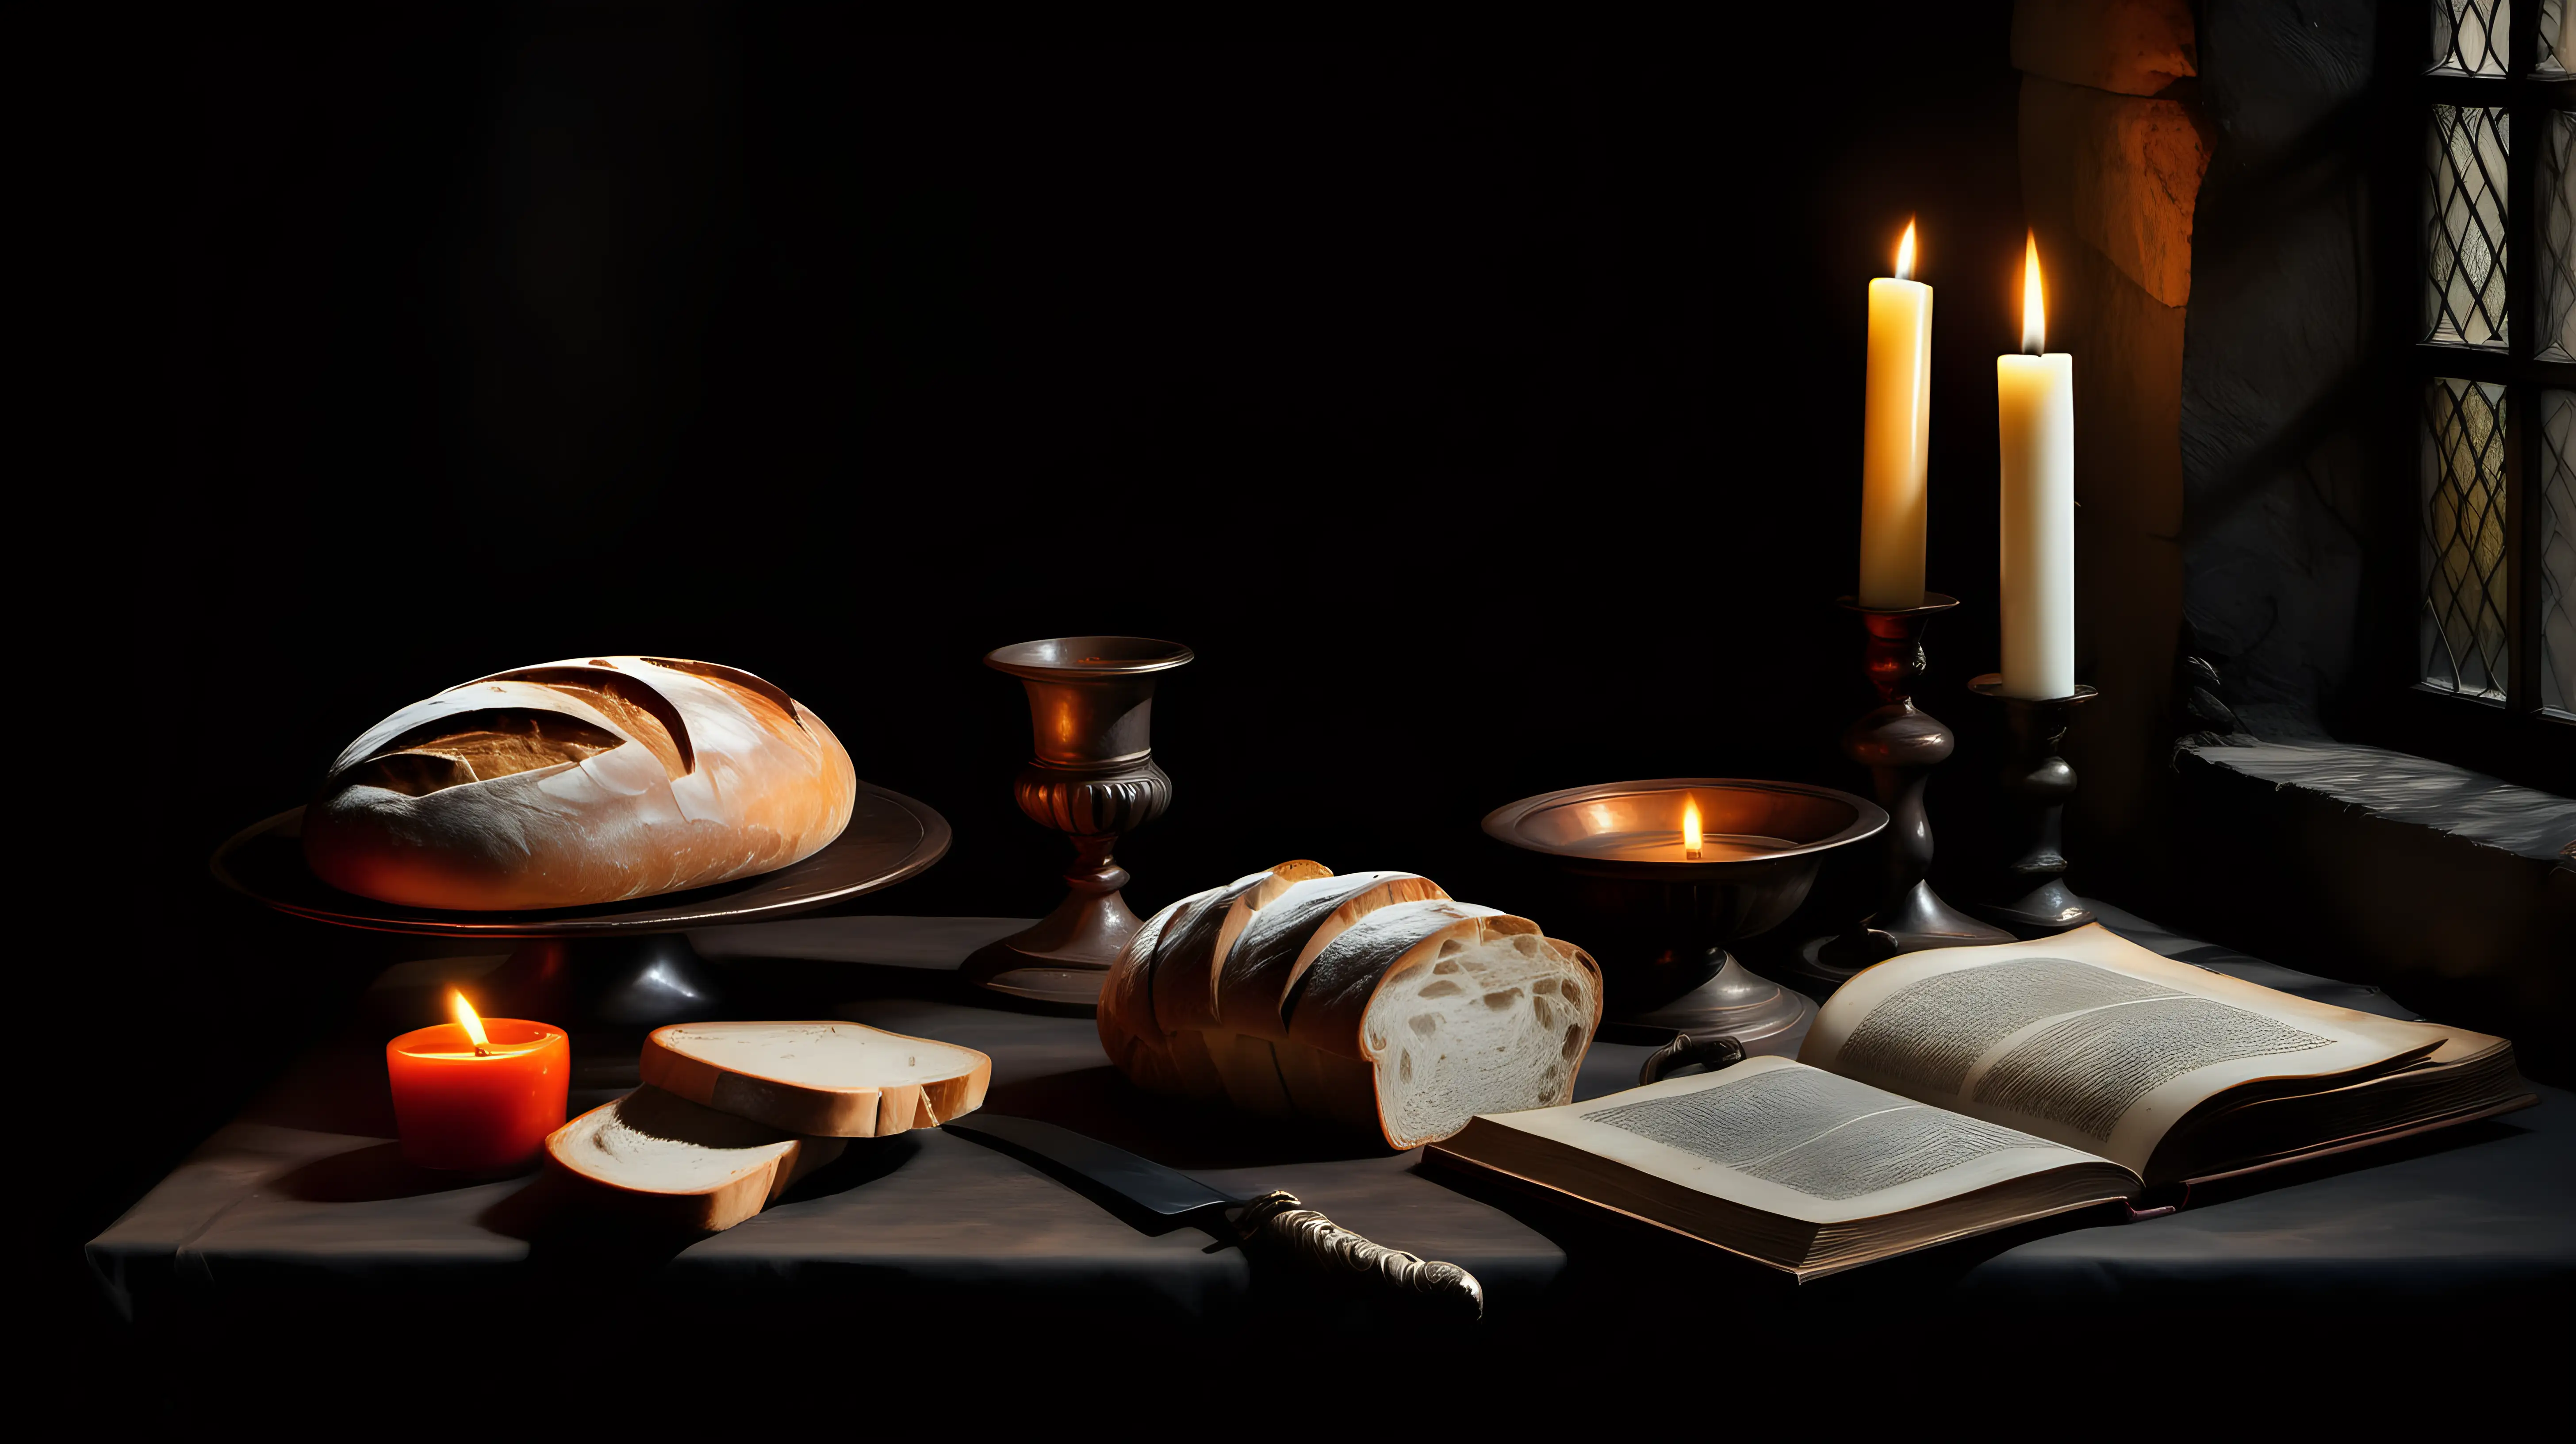 Still life in style of 1500s paintings, Table by a window, bread, knife, book, candle. dark background 